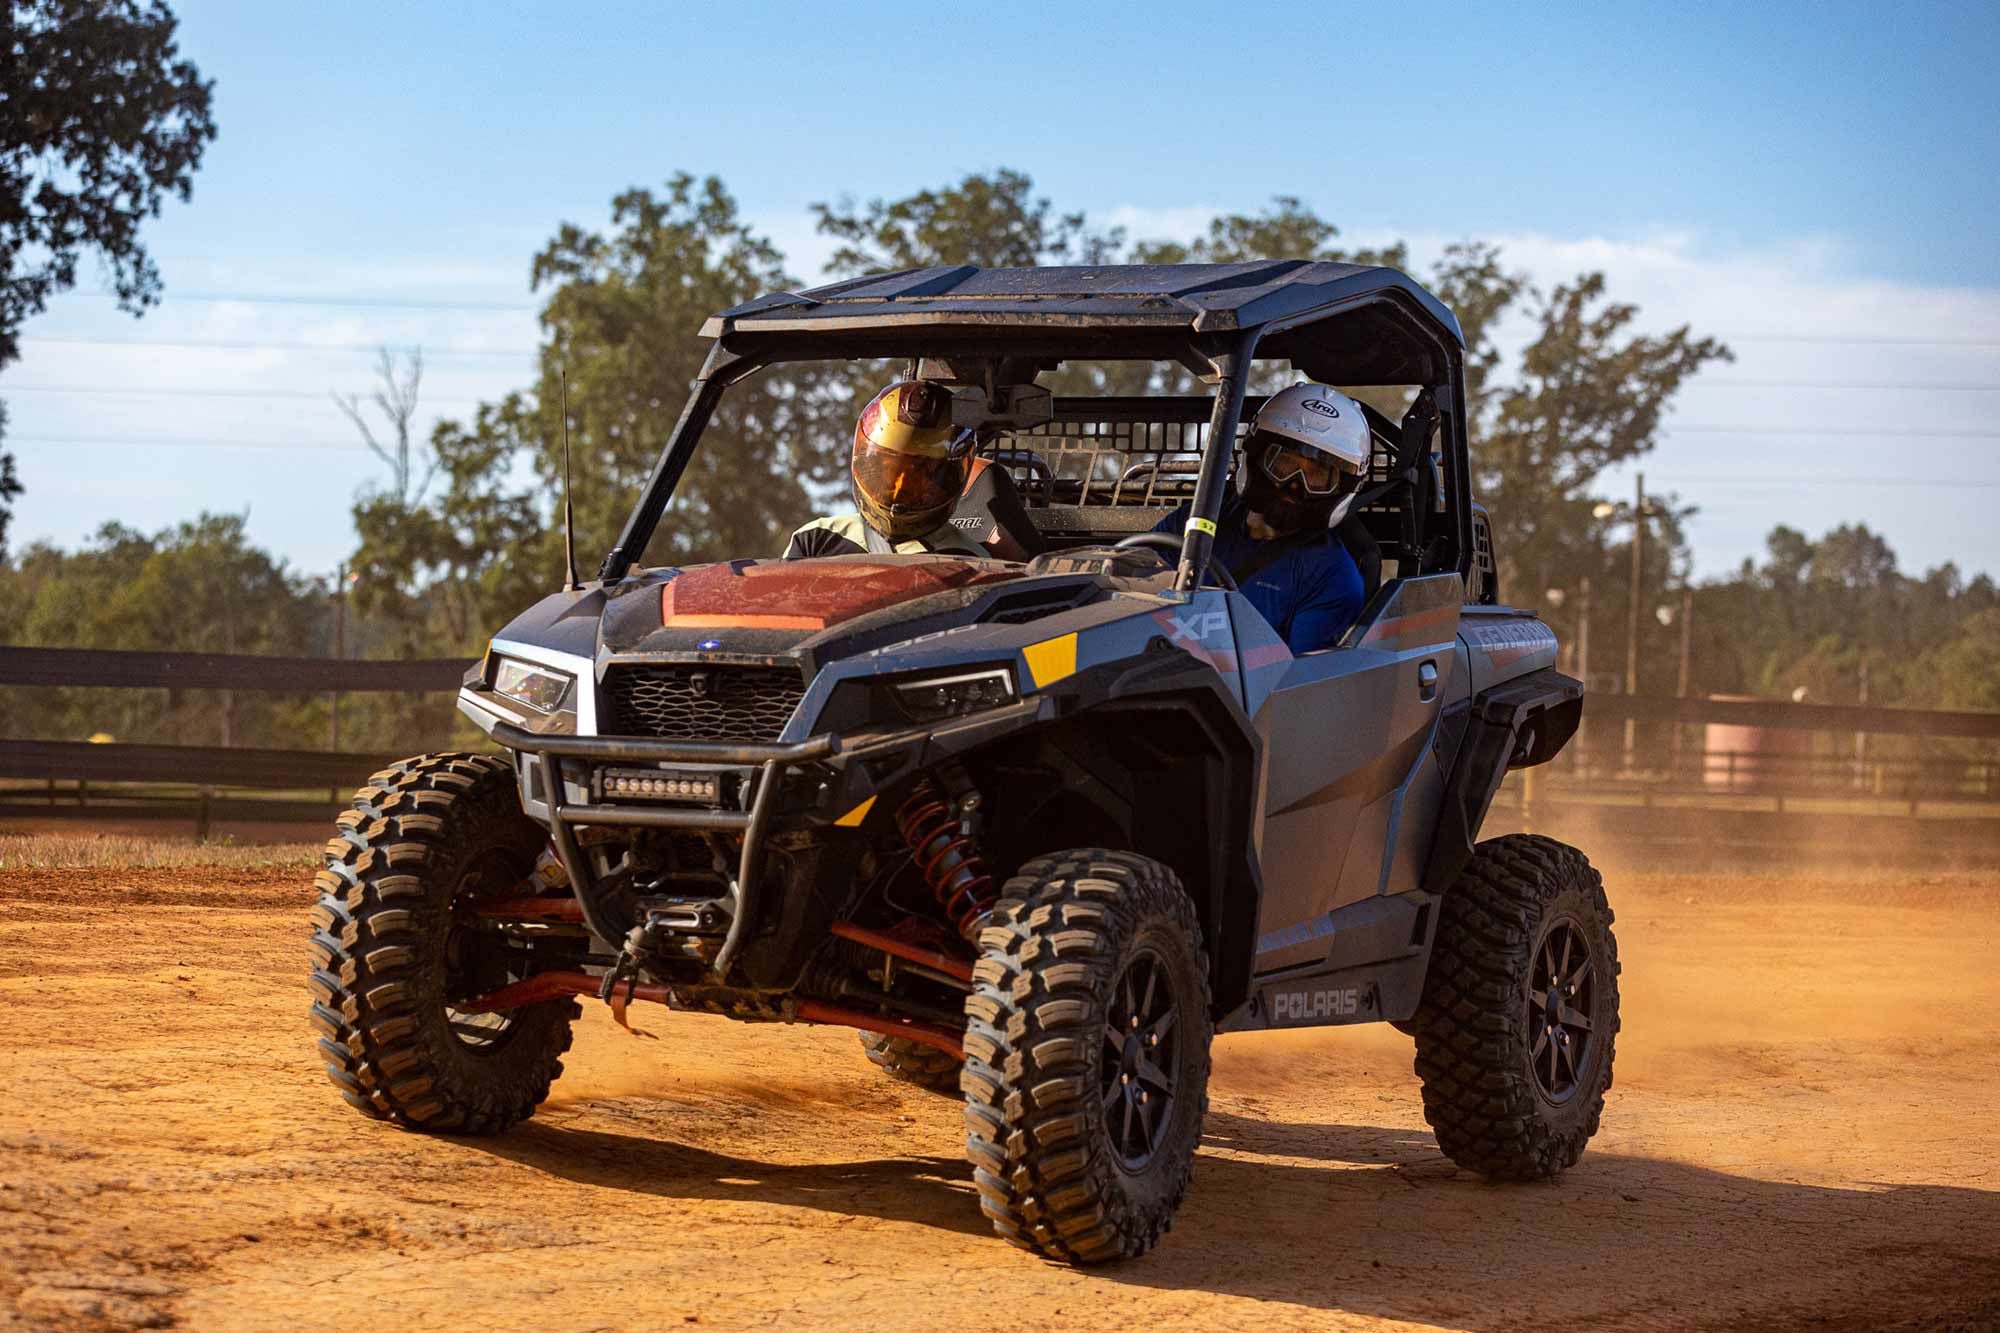 The 2022 Polaris General Trailhead Edition is aimed squarely at the overlanding crowd, but it’s got great go-fast chops.